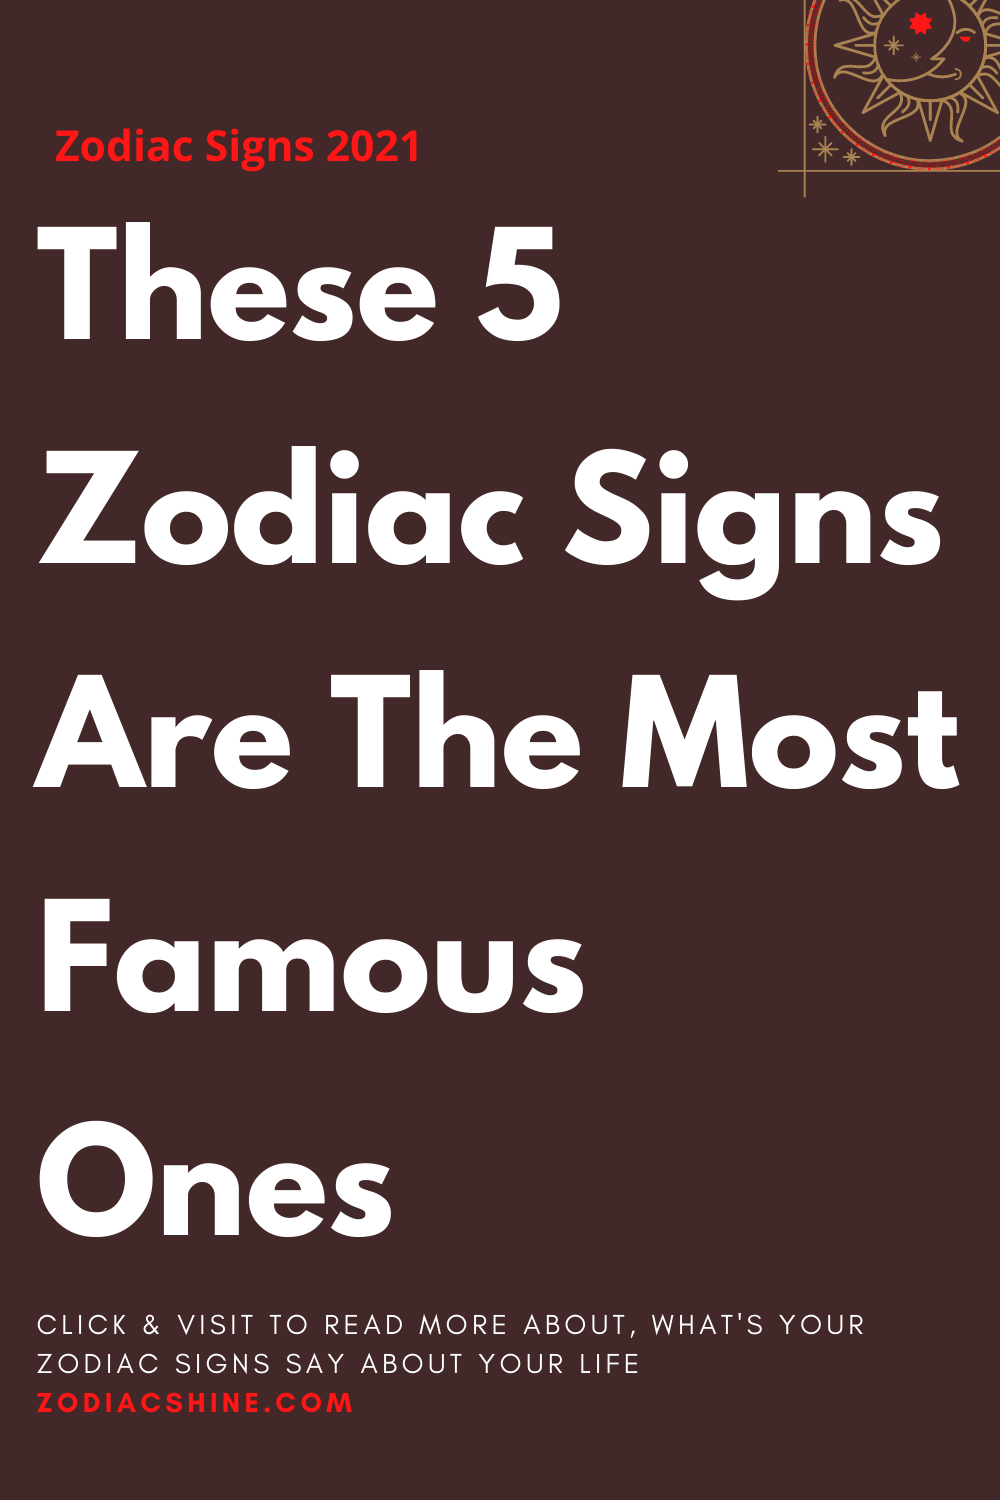 These 5 Zodiac Signs Are The Most Famous Ones